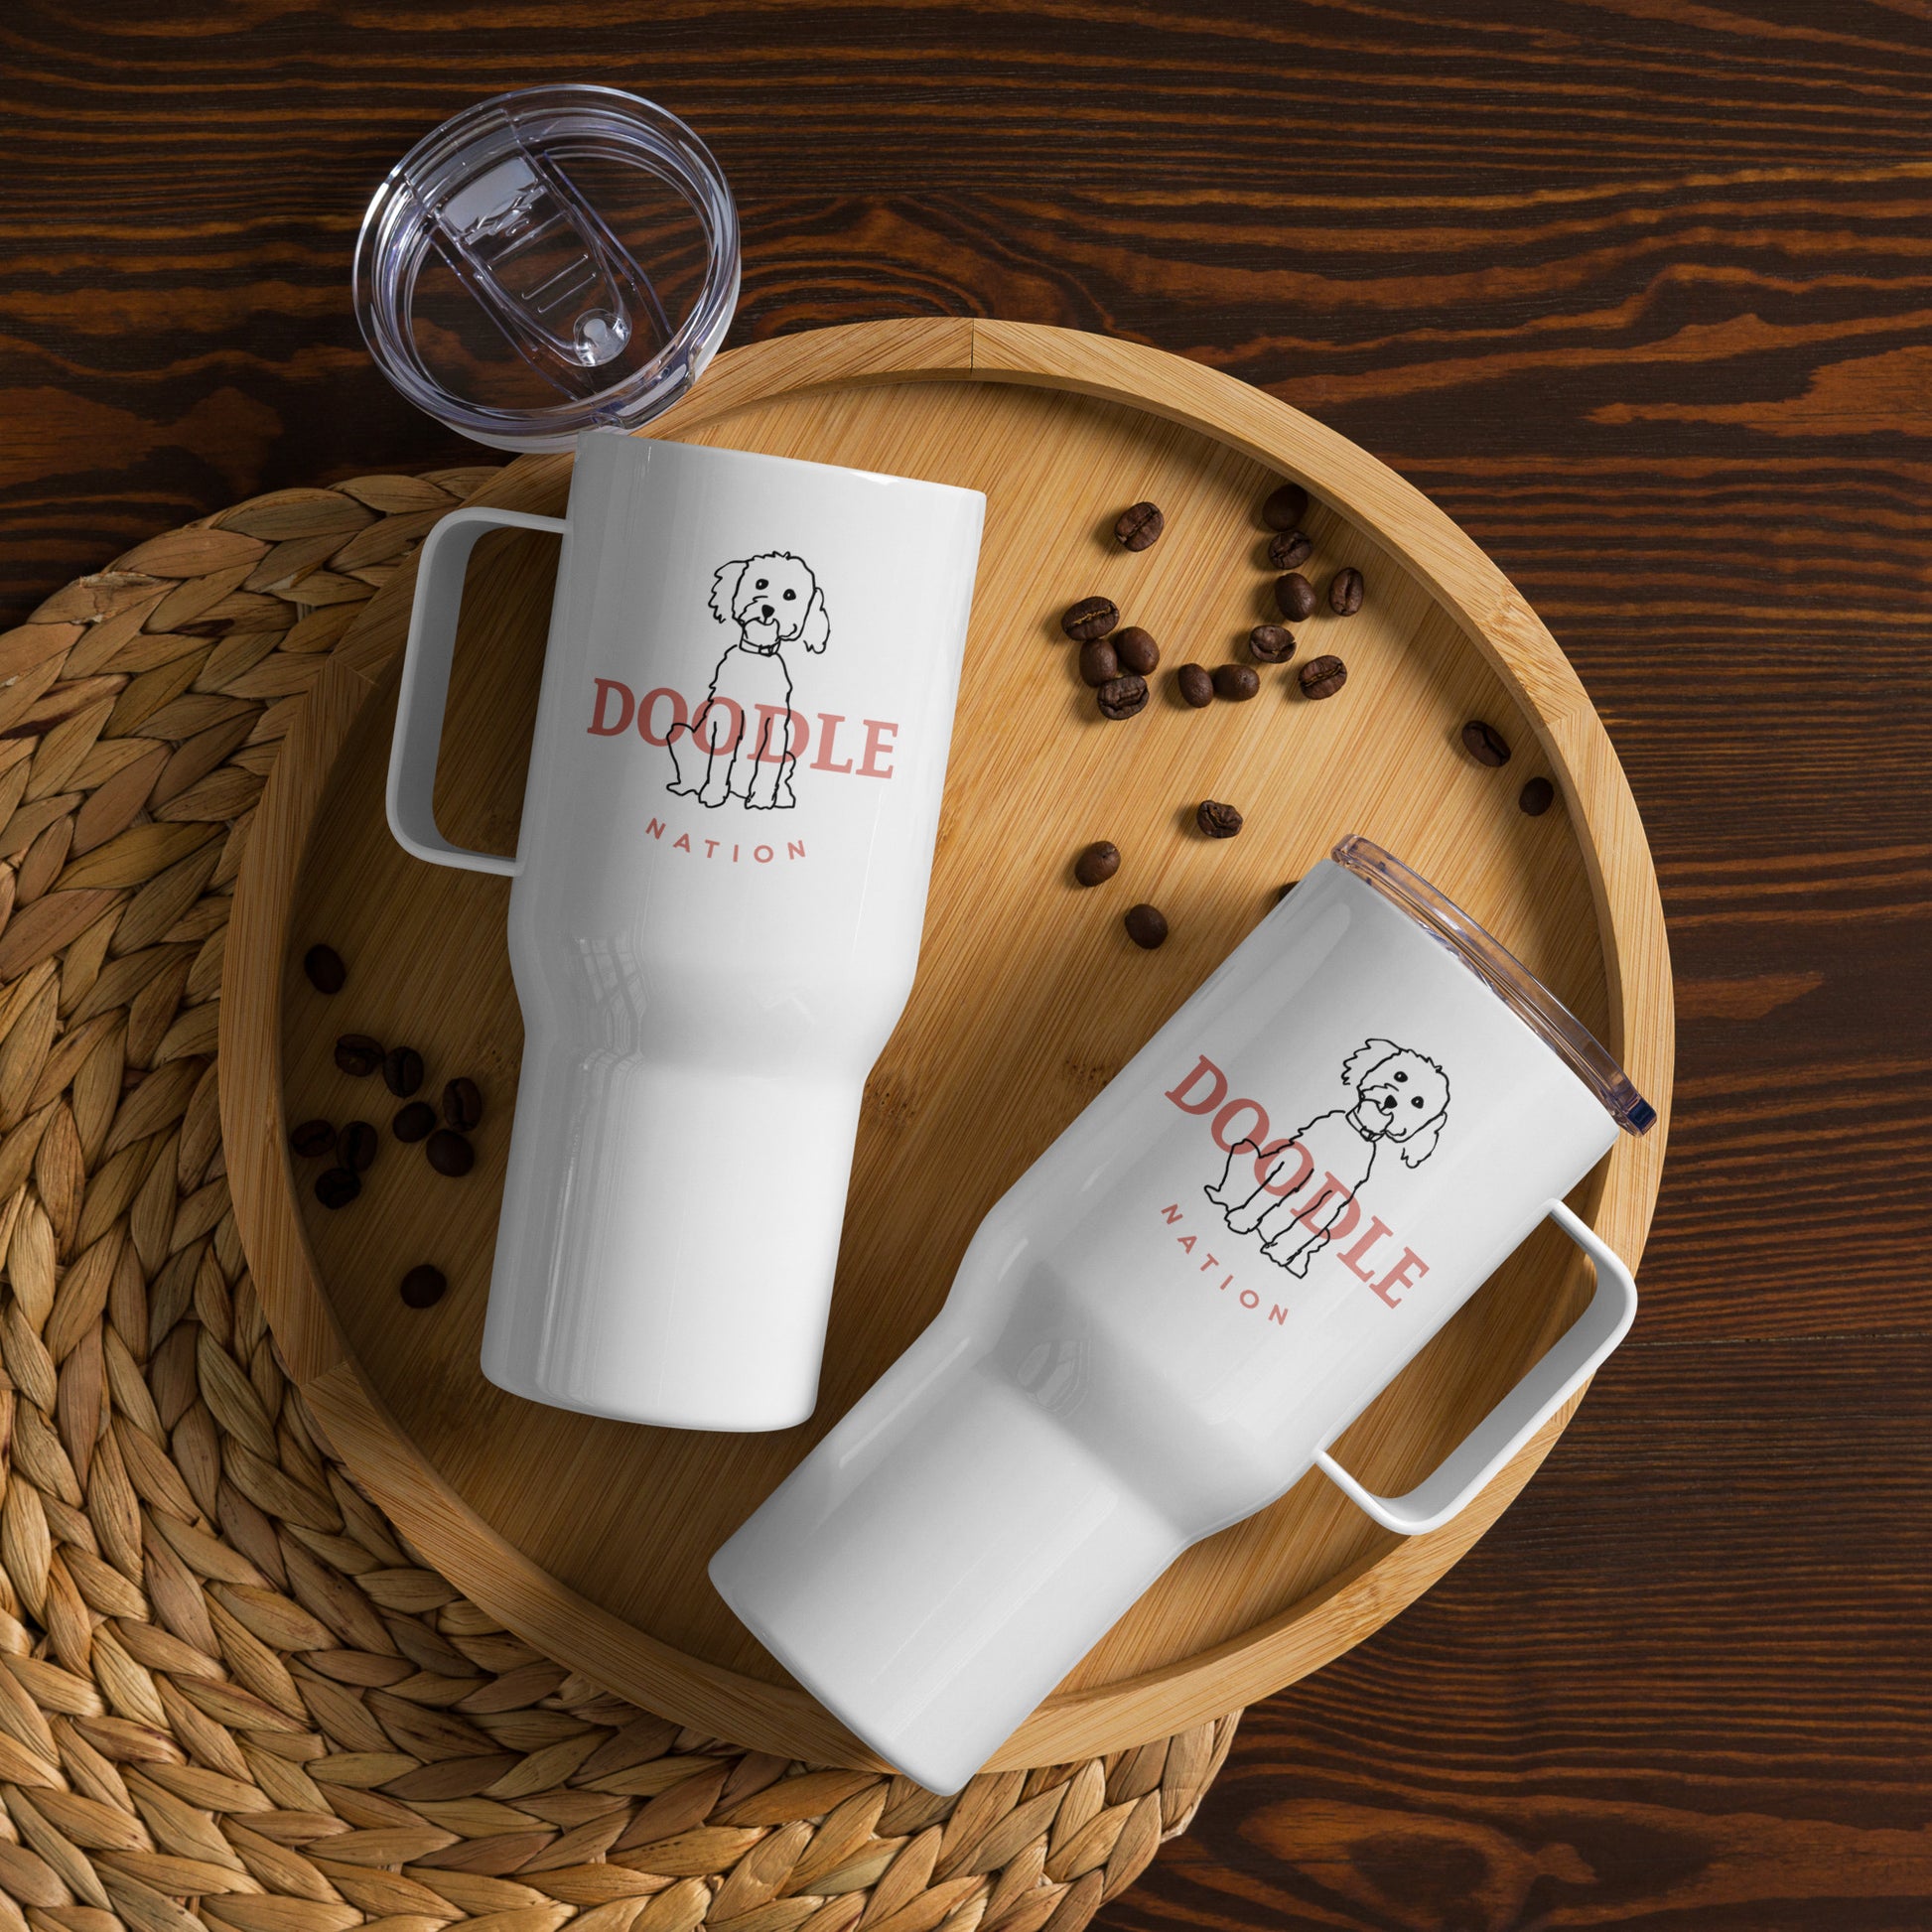 Two White travel tumblers with goldendoodle dog and saying "Doodle Nation"